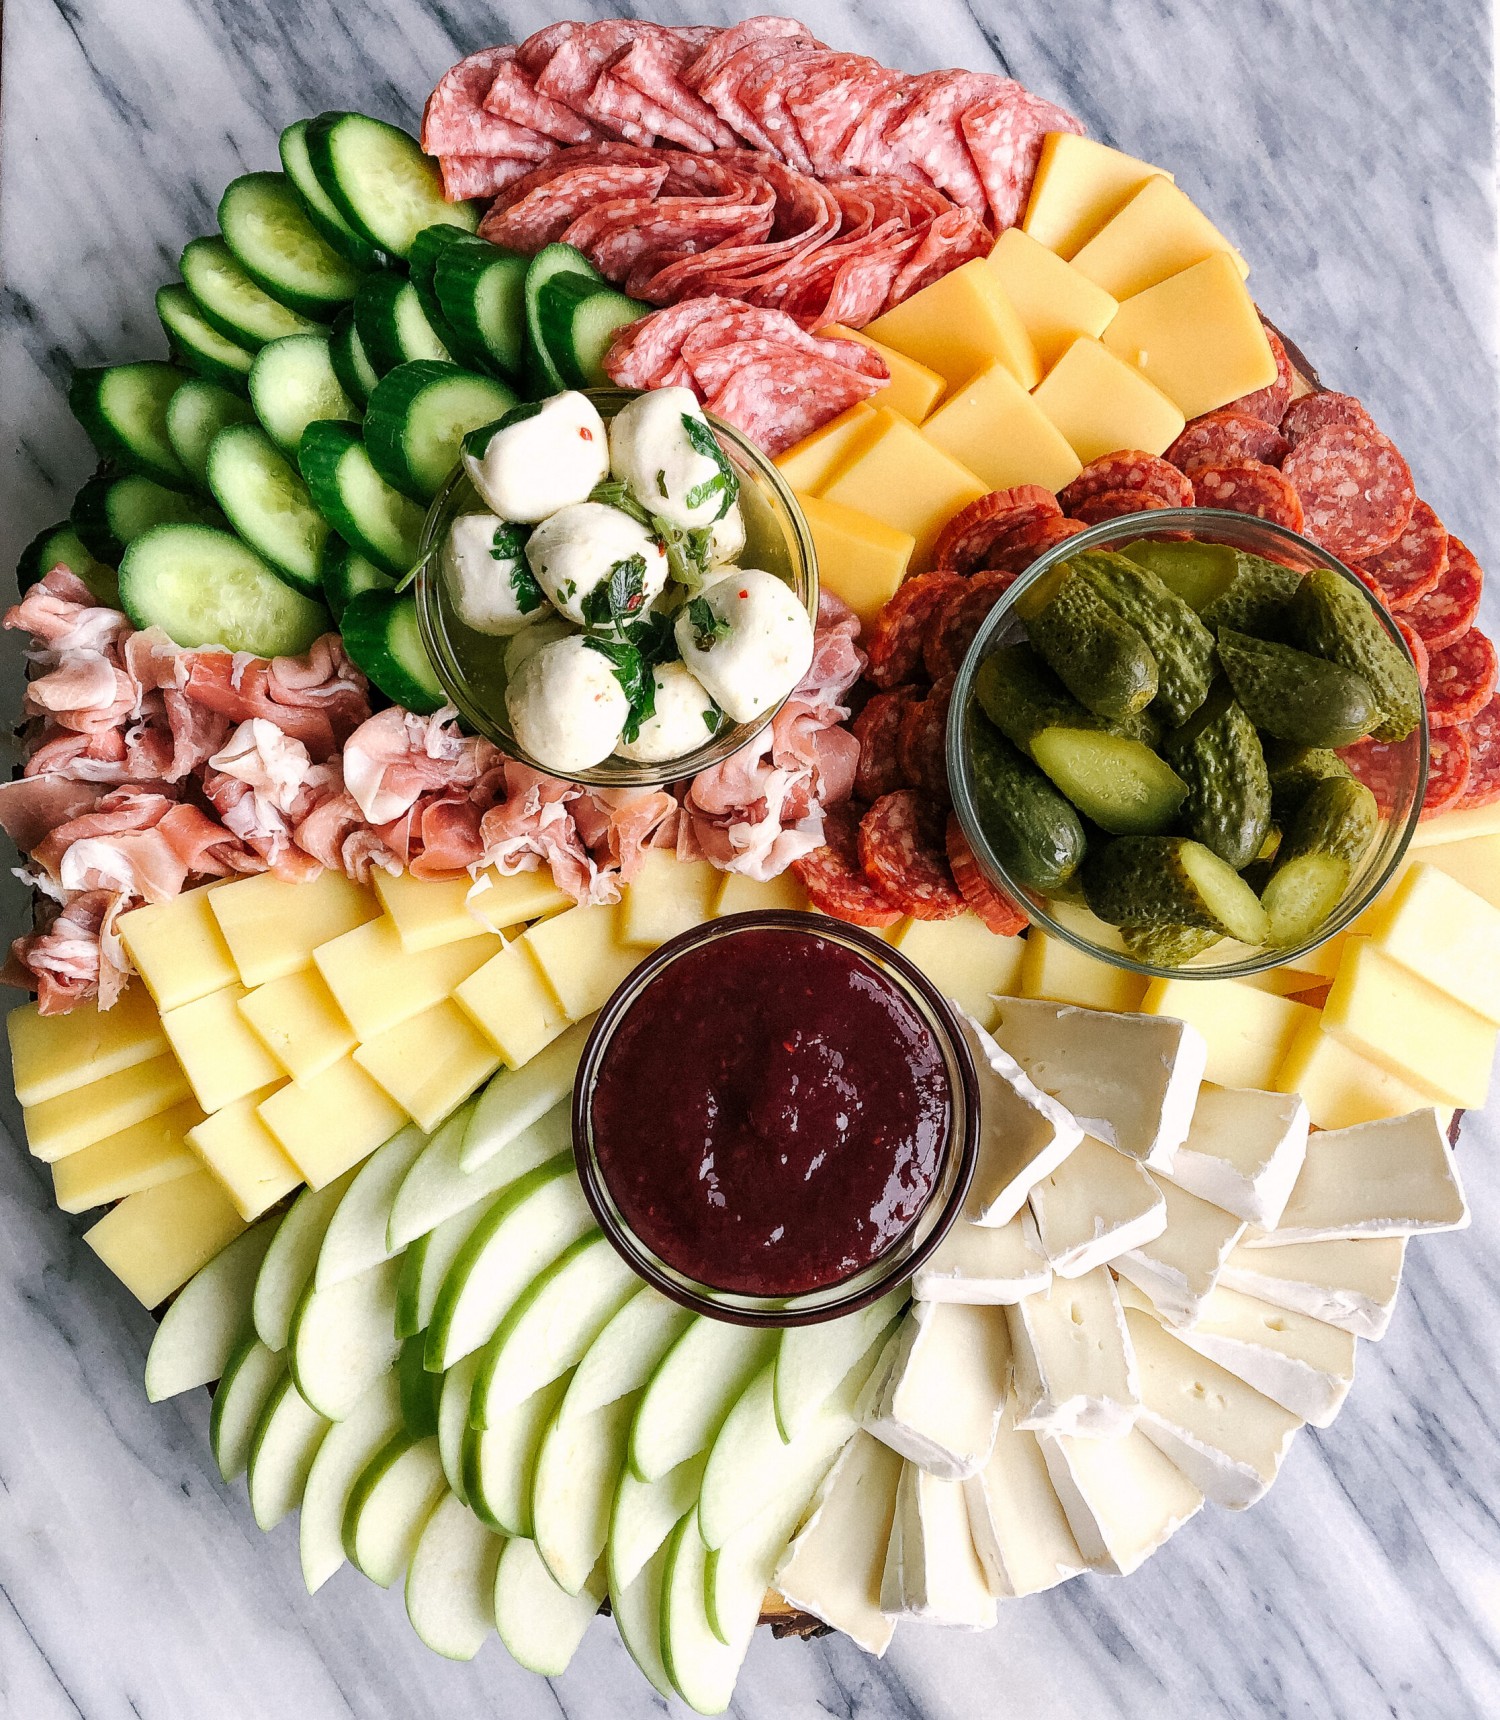 Charcuterie Board Ideas - Everything You Need for a Perfect Cheese Plate